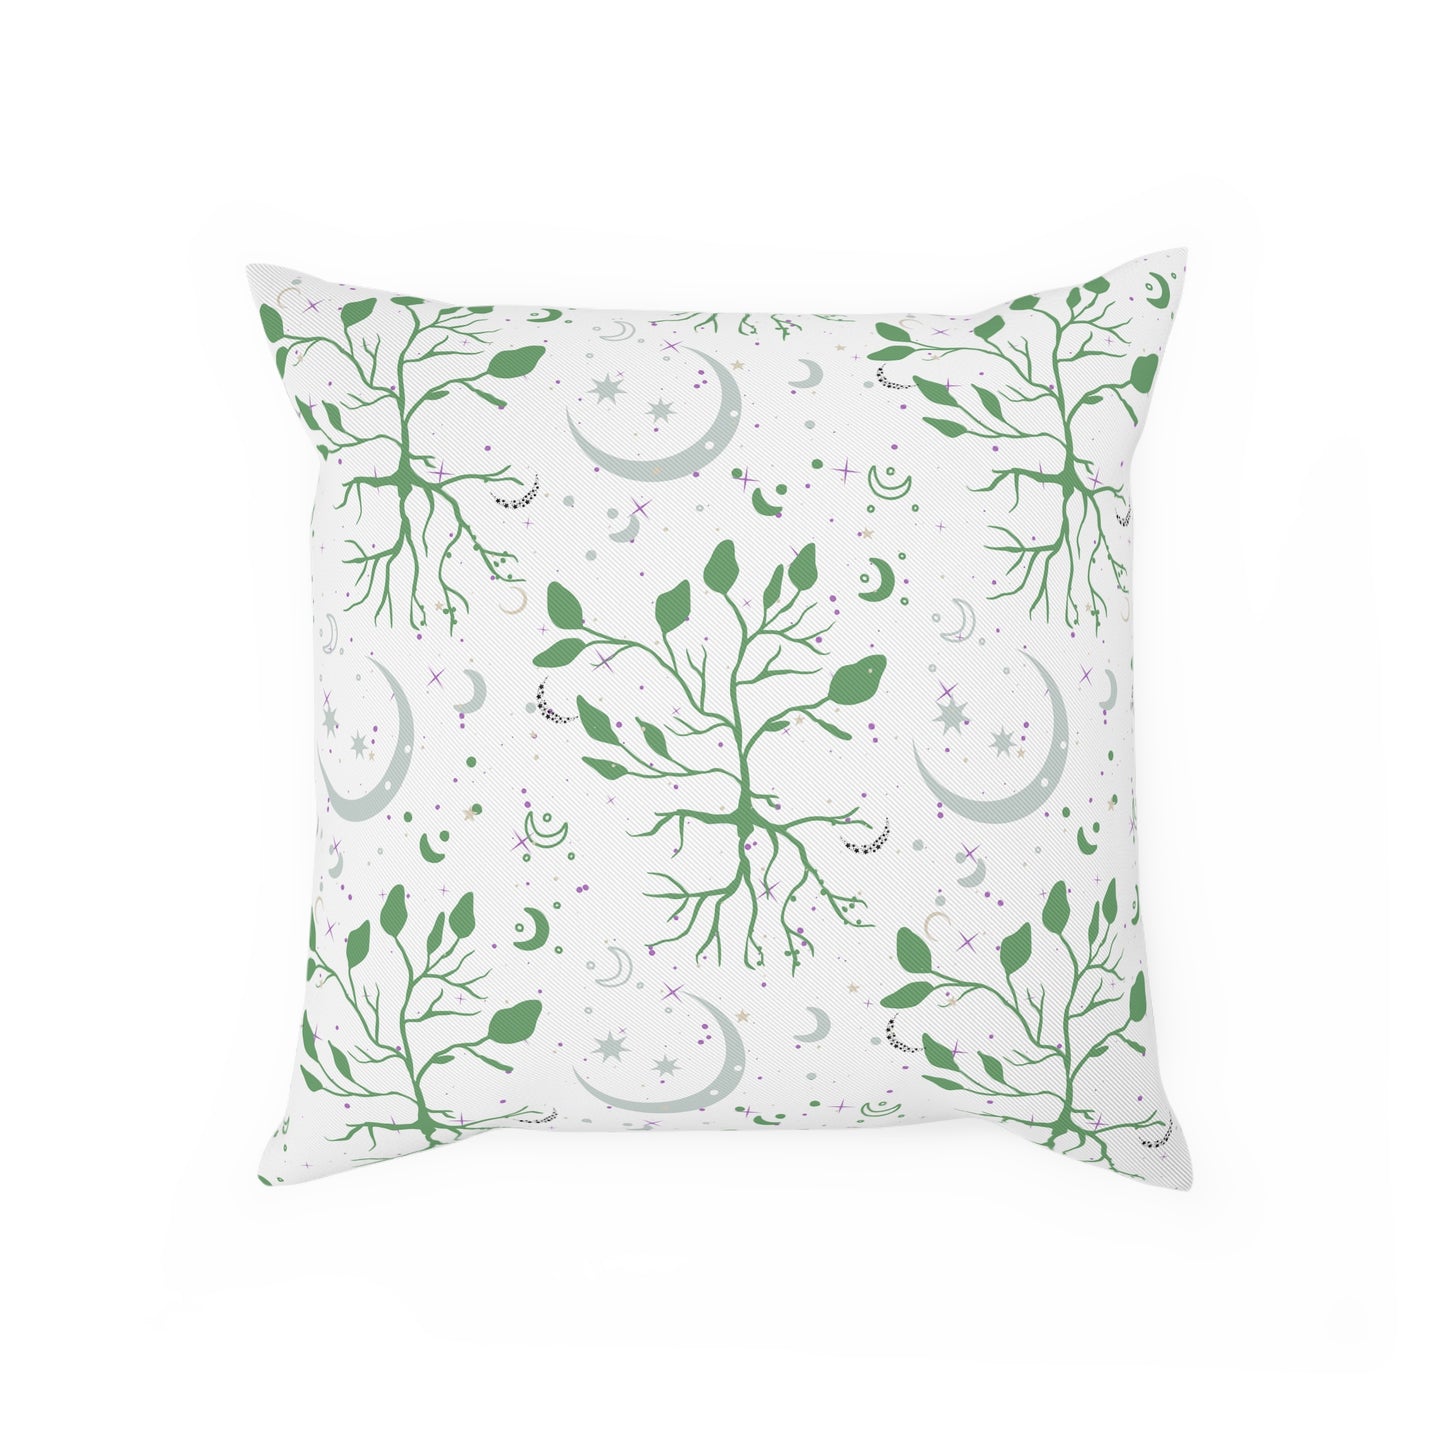 Moon Roots (Green) | Cushion 3 sizes